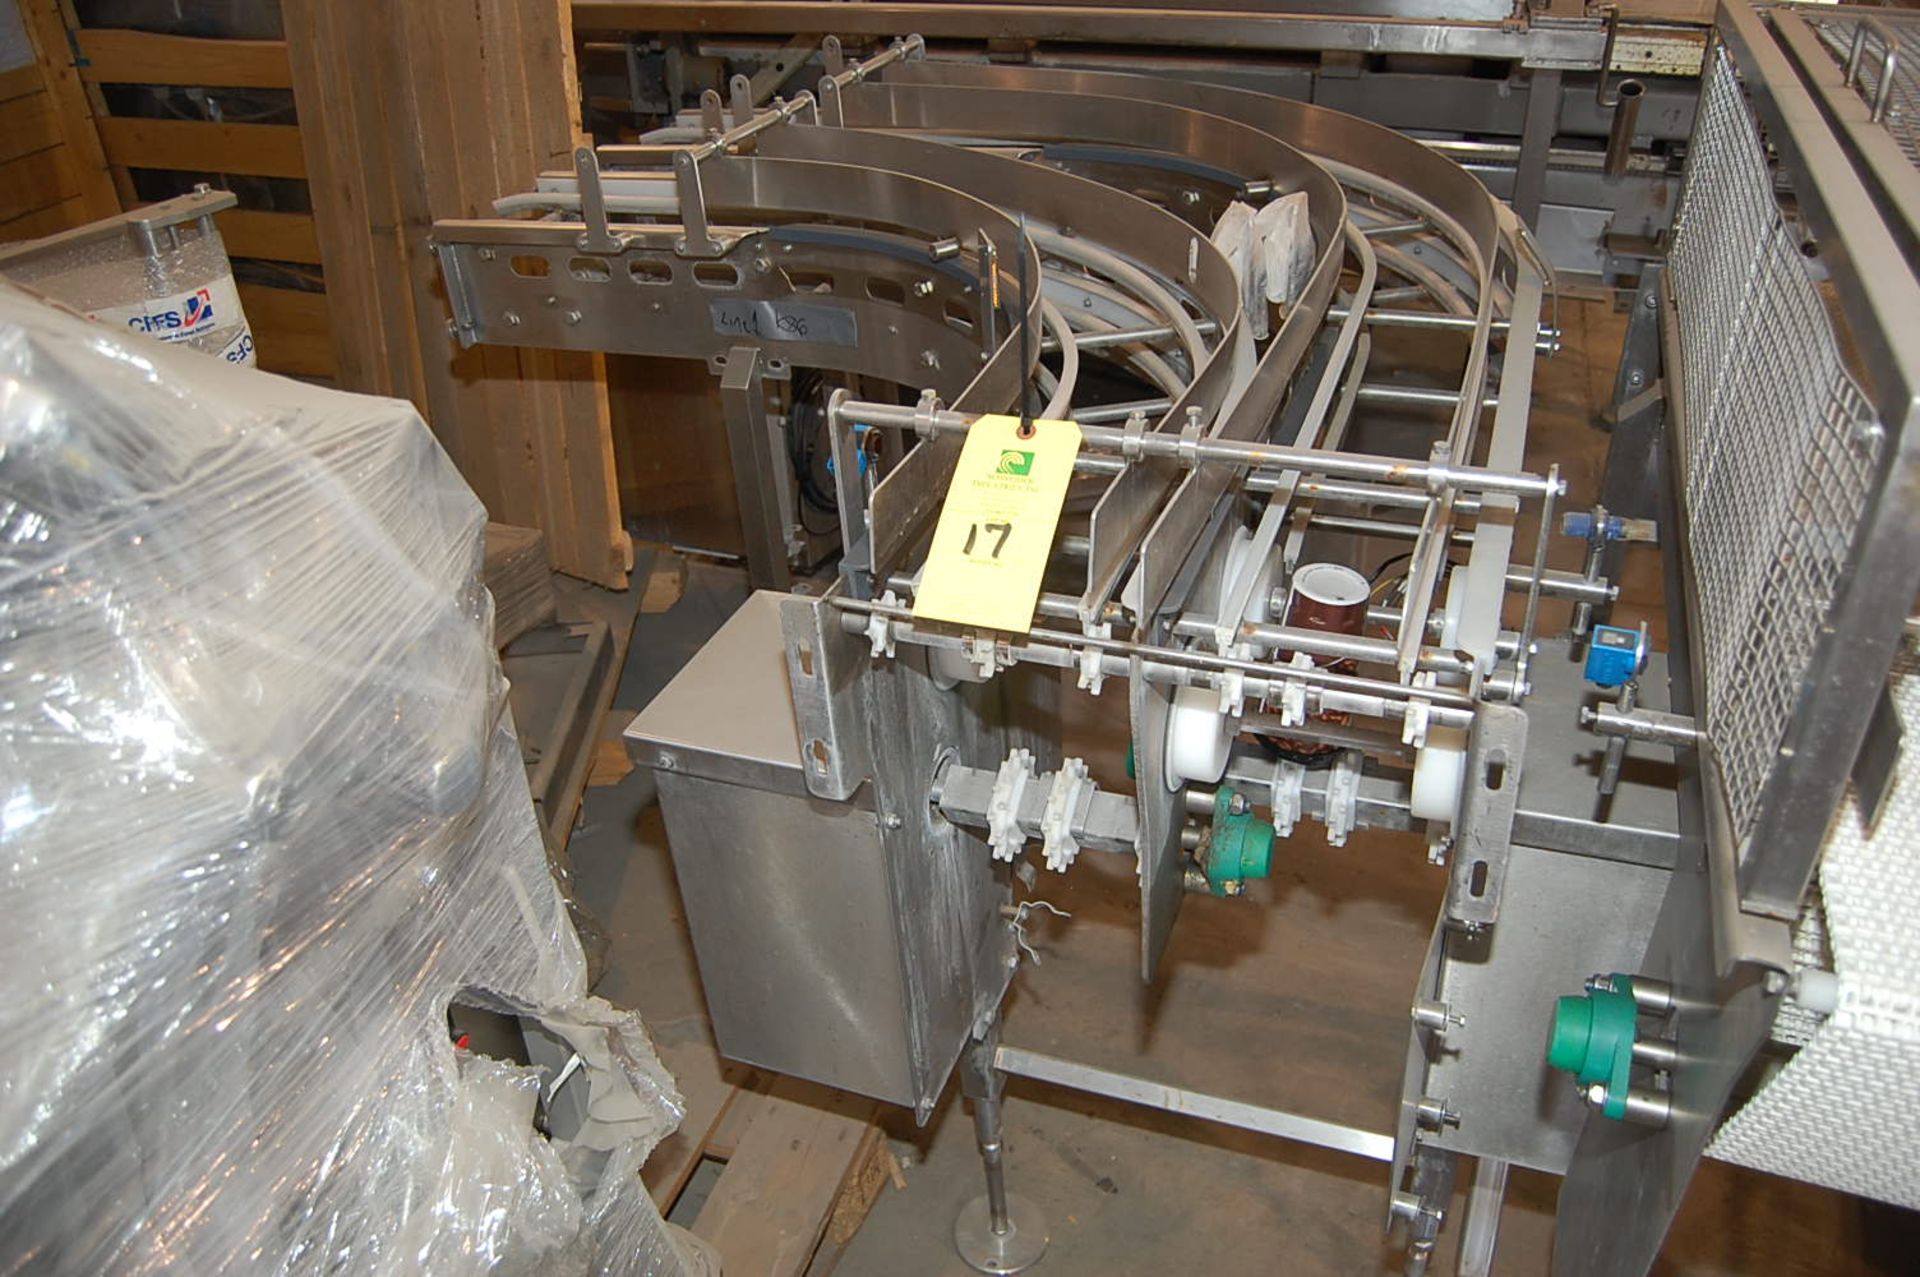 90  in. Conveyor, Fractional HP Motor, SS Control Box Cabinet Rigging fee: $50